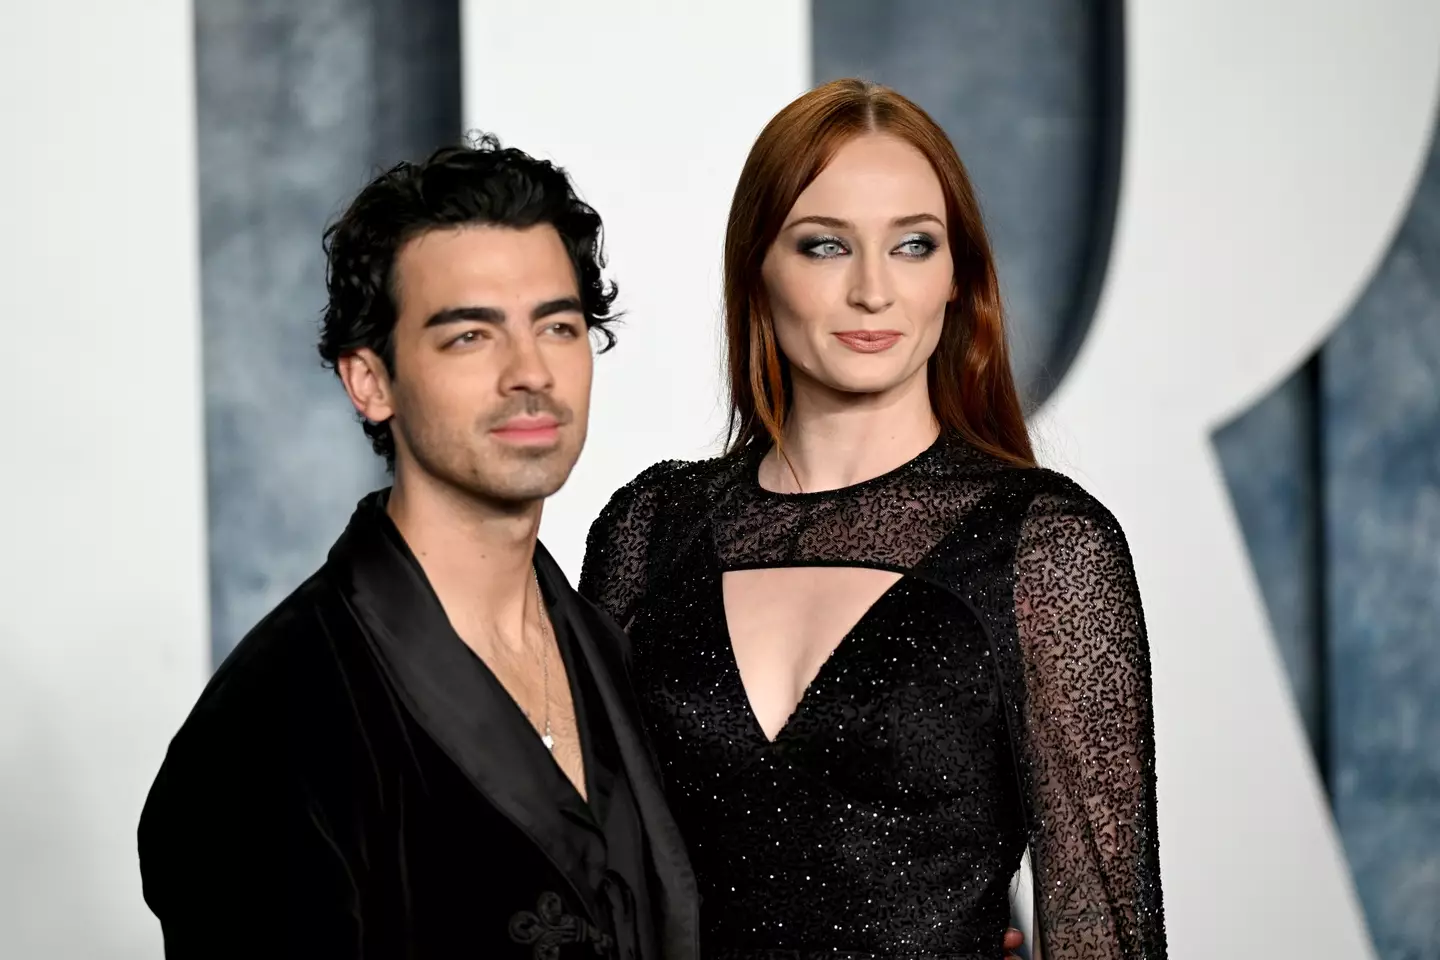 Sophie Turner and Joe Jonas have been married for four years.